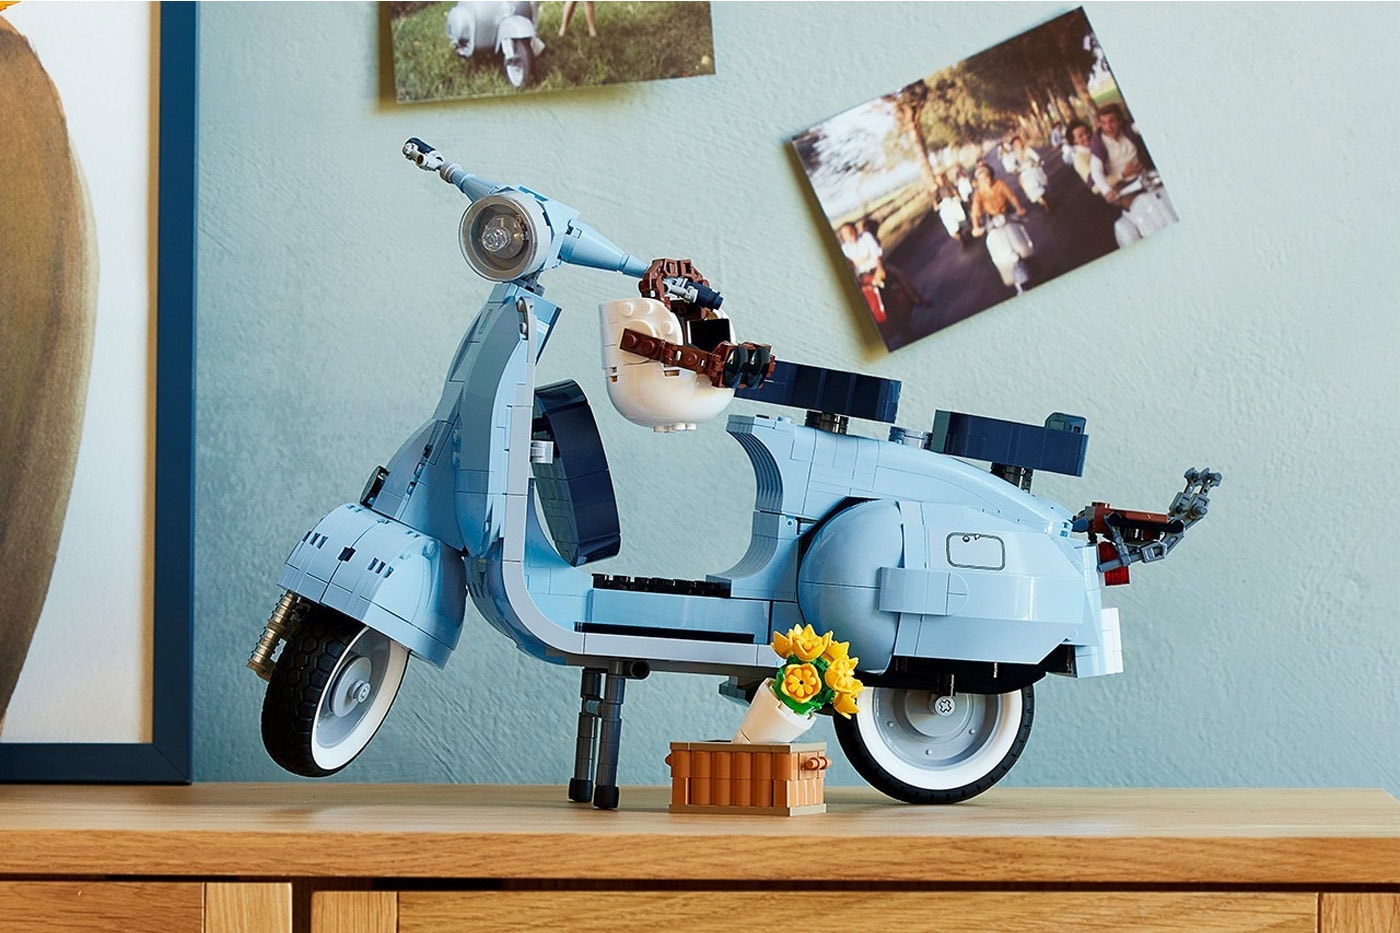 LEGO's Vespa 125 Is Its Latest Addition to its Creator Series